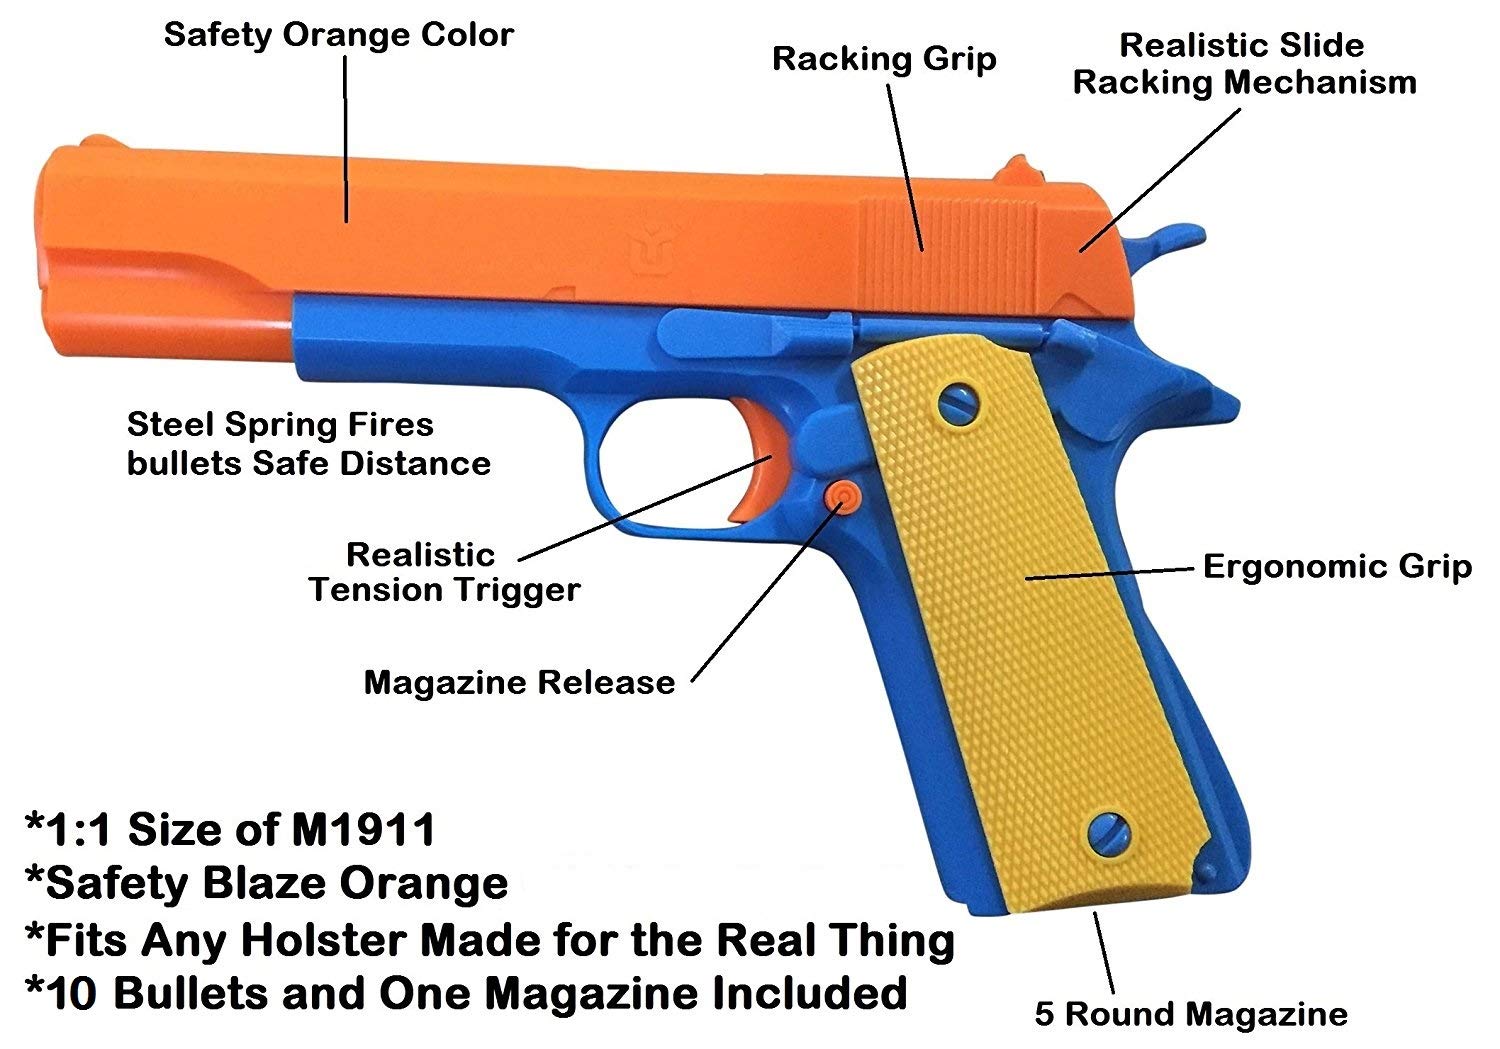 Colt 1911 Toy Gun with Ejecting Magazine and Glow Tip Bullets - Style of M1911 with Slide Action Orange Barrel for Safety Training or Play - Unique Gift Intended for Fun, Not Distance or Accuracy